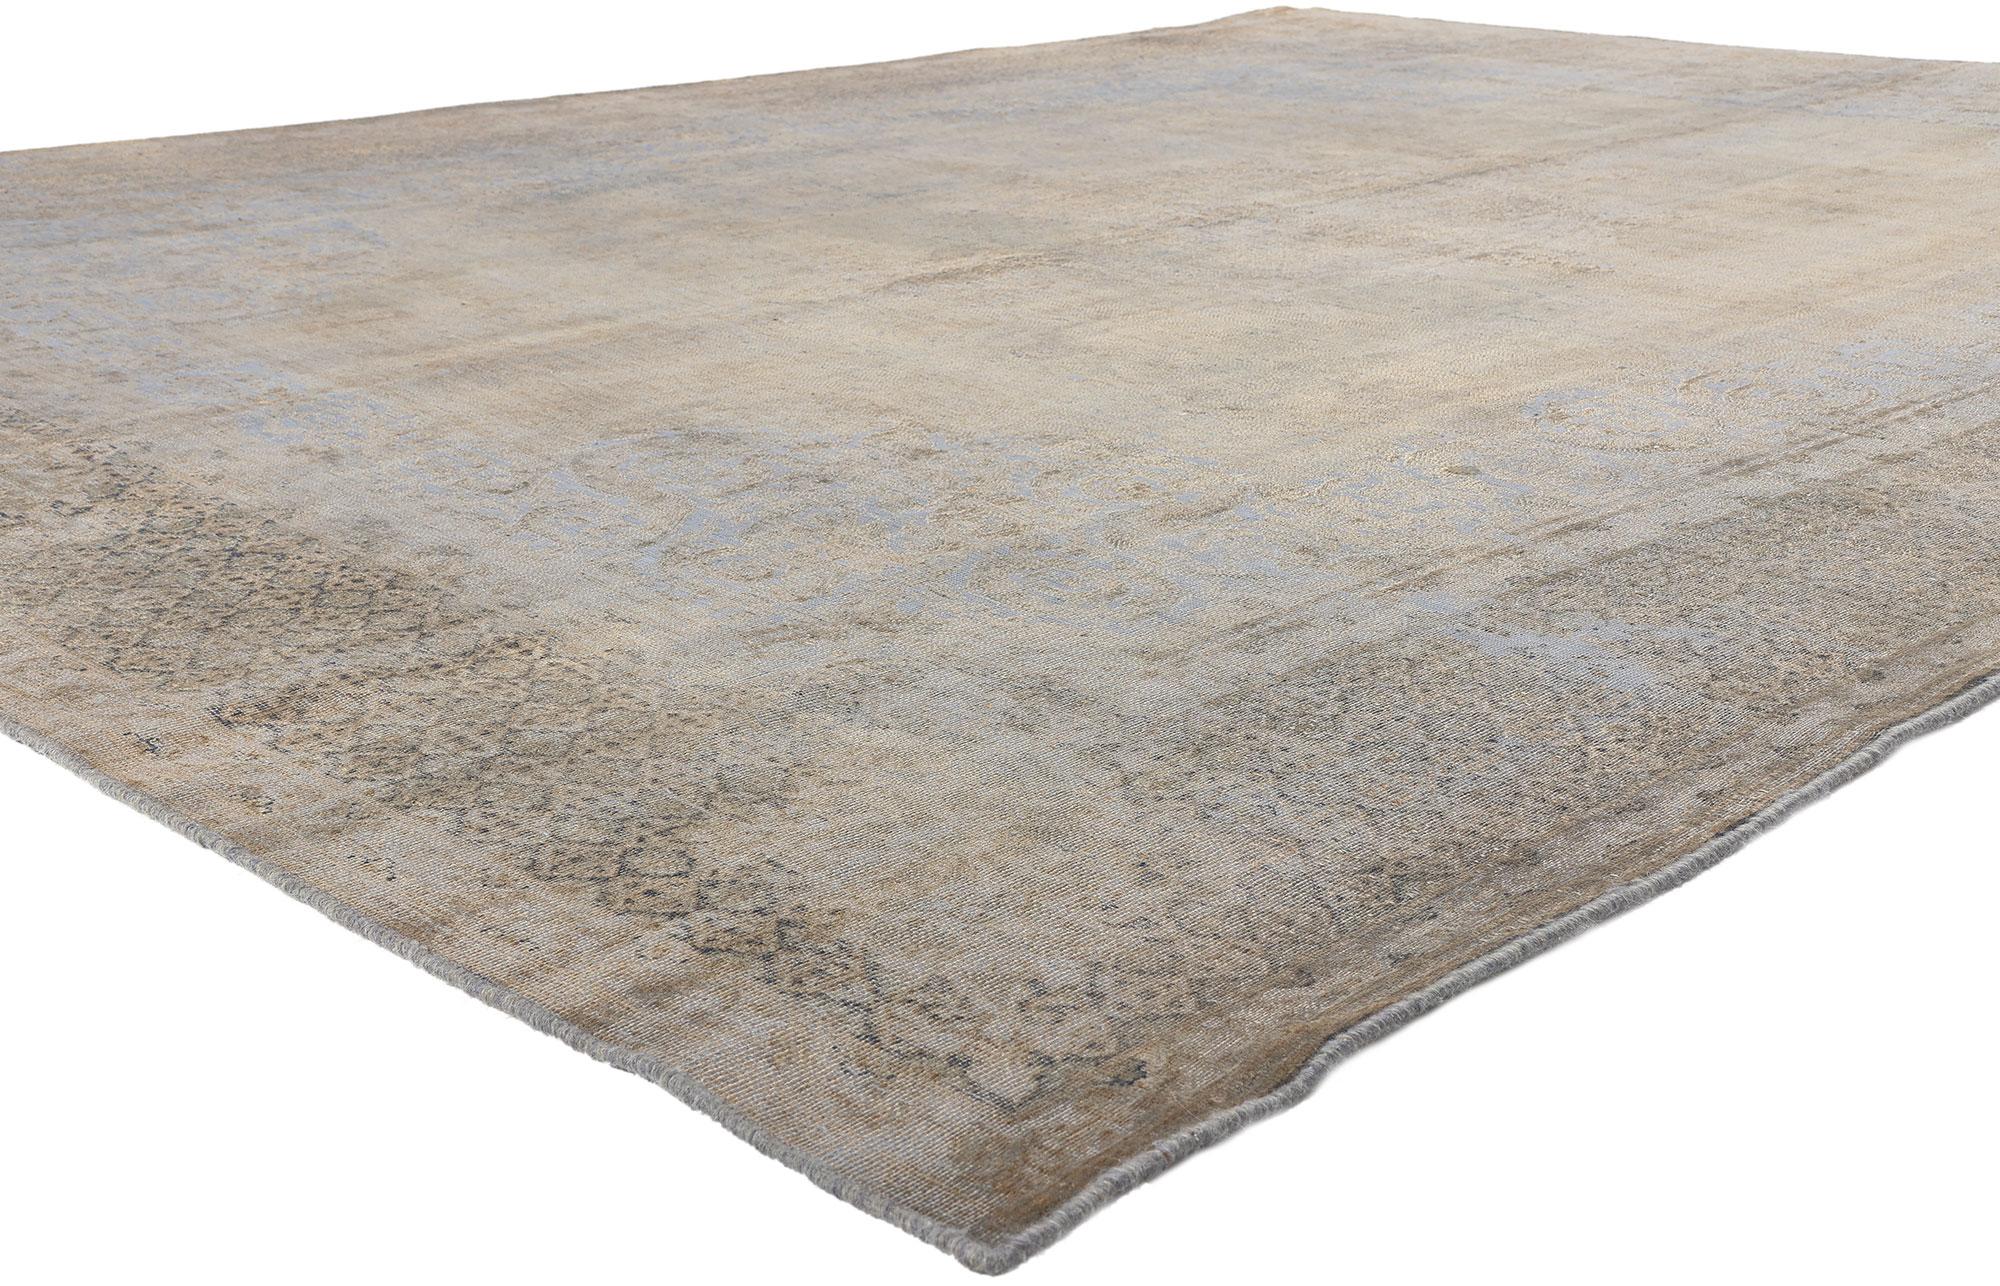 60765 Vintage Turkish Overdyed Rug, 09’06 x 12’11. 
Get ready for a design duel where Belgian Chic locks horns with French Industrial in the battle of the vintage Turkish rugs. It's a decor showdown, and this hand-knotted wool rug is the star of the